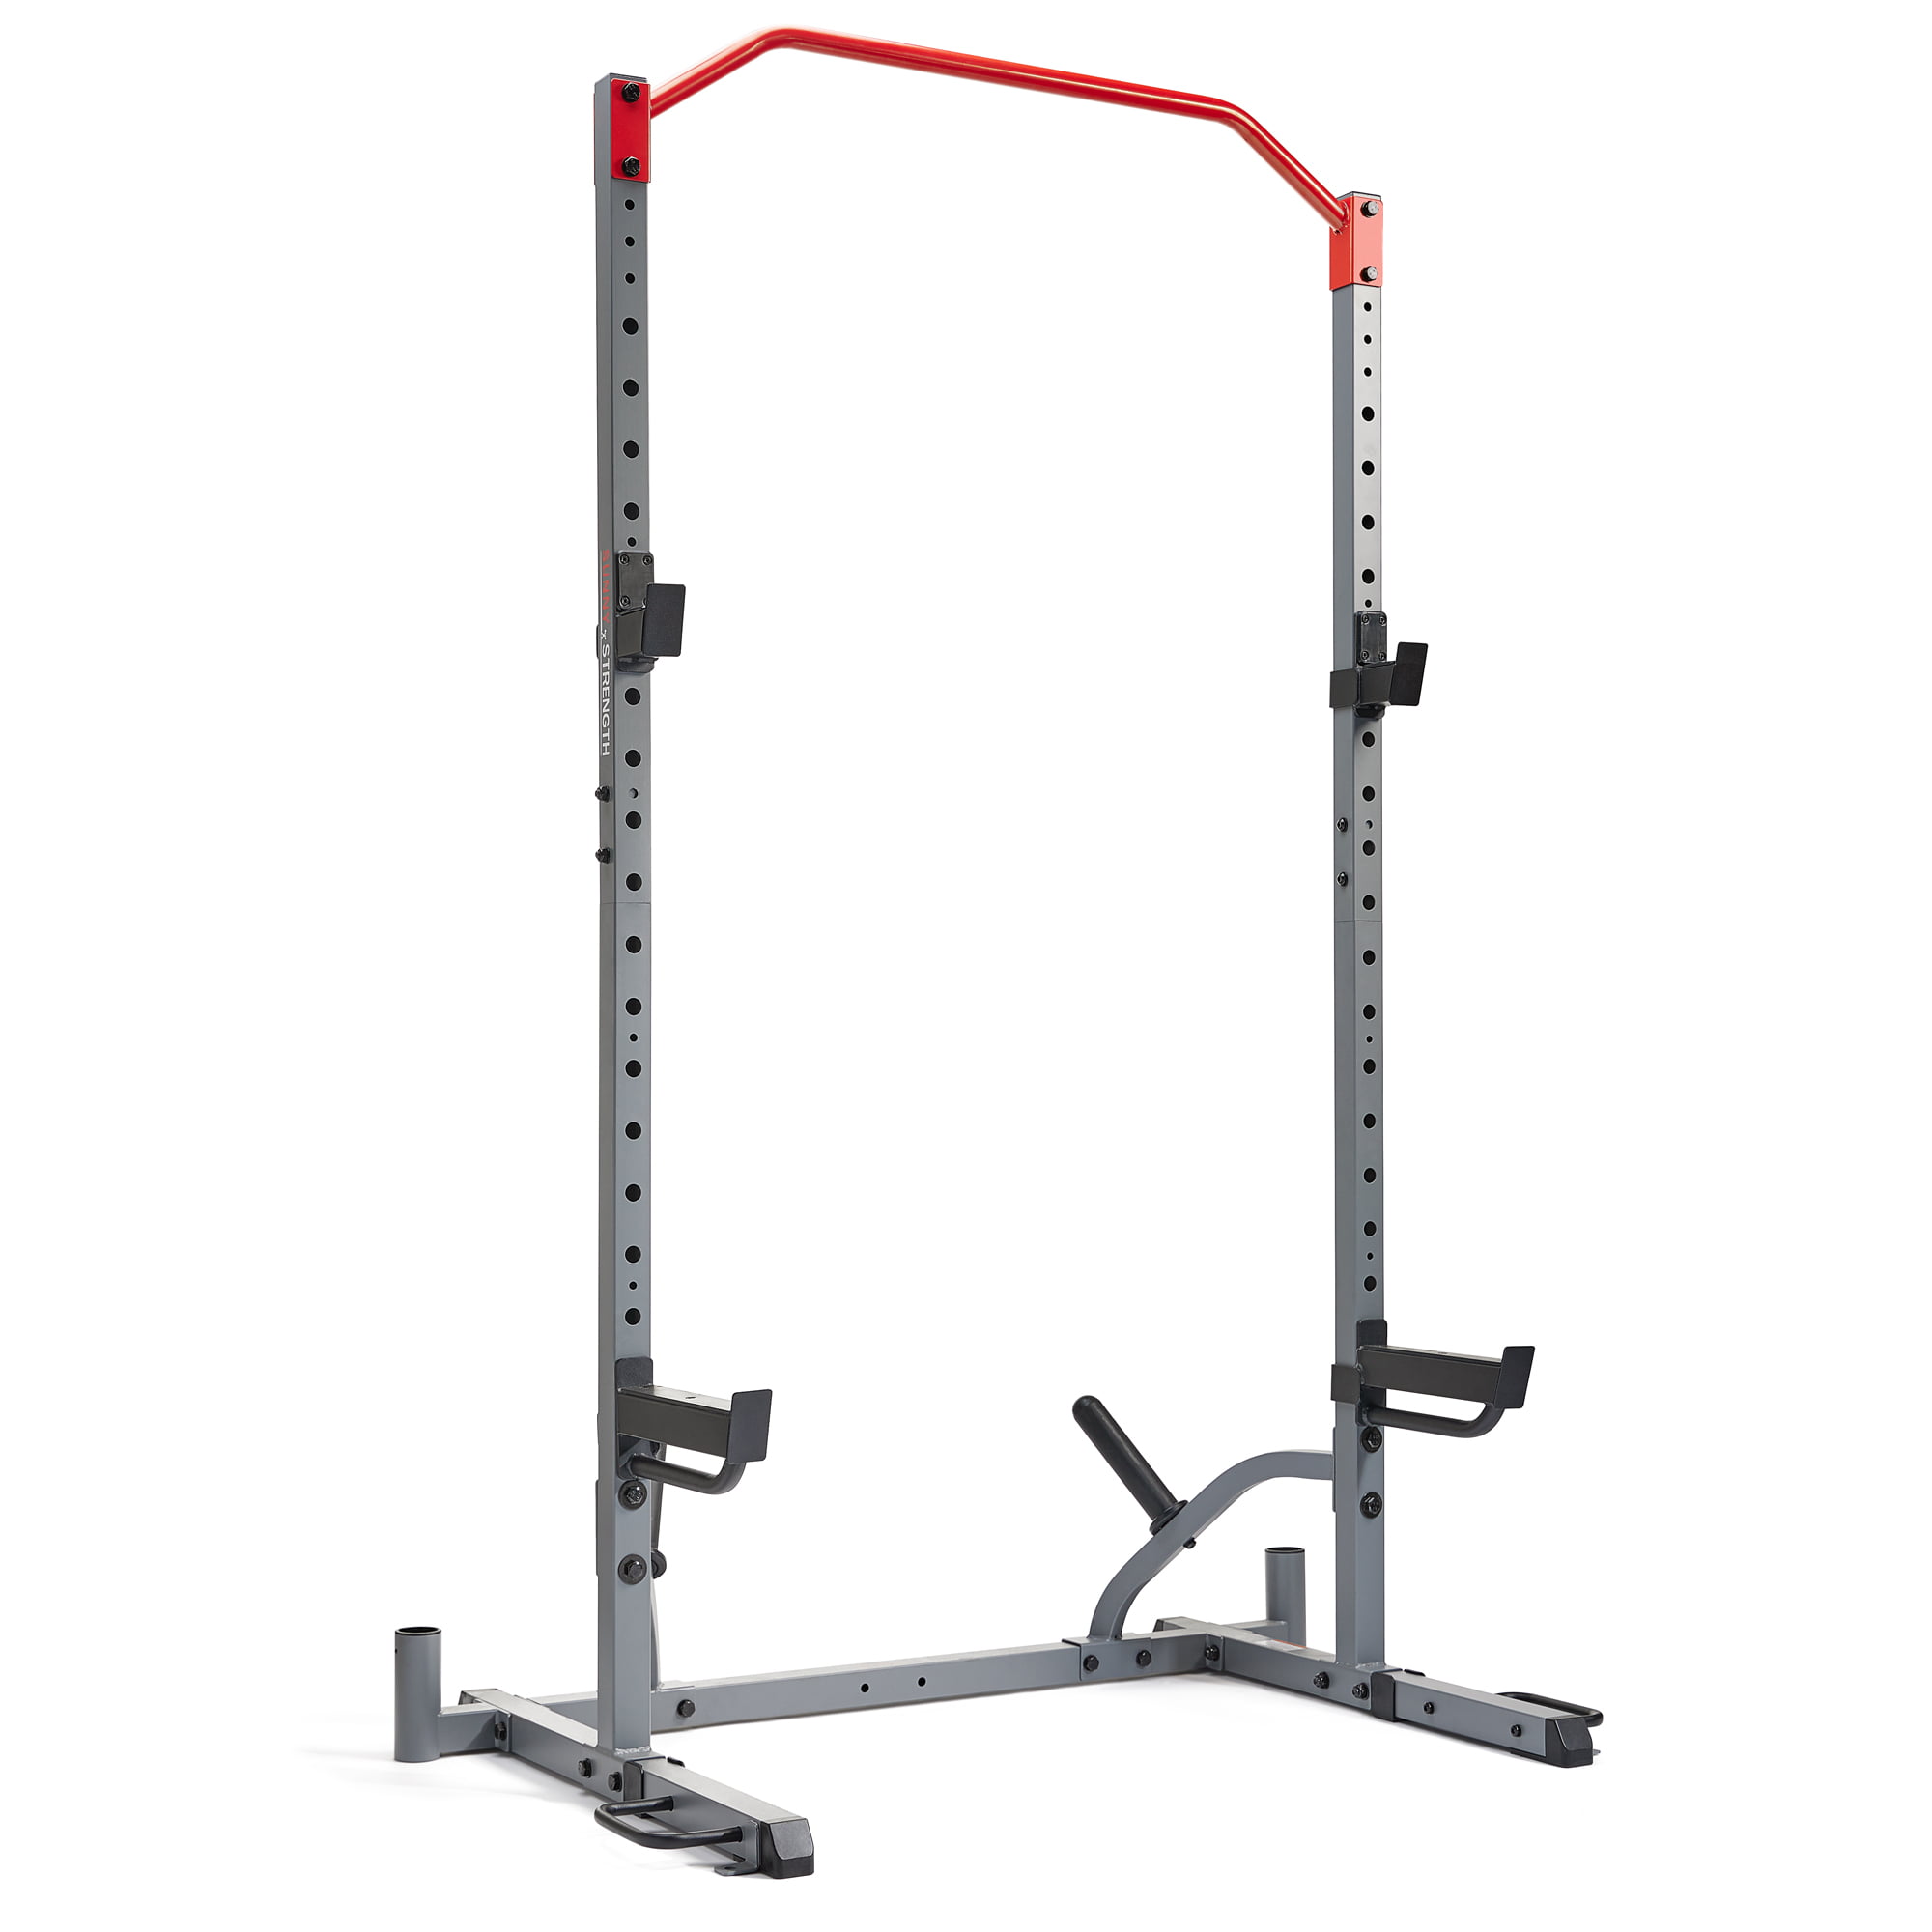 Sunny Health & Fitness PowerVersa All-in-One Bench Press & Strength Training Squat Rack For Home Gym - 969543602